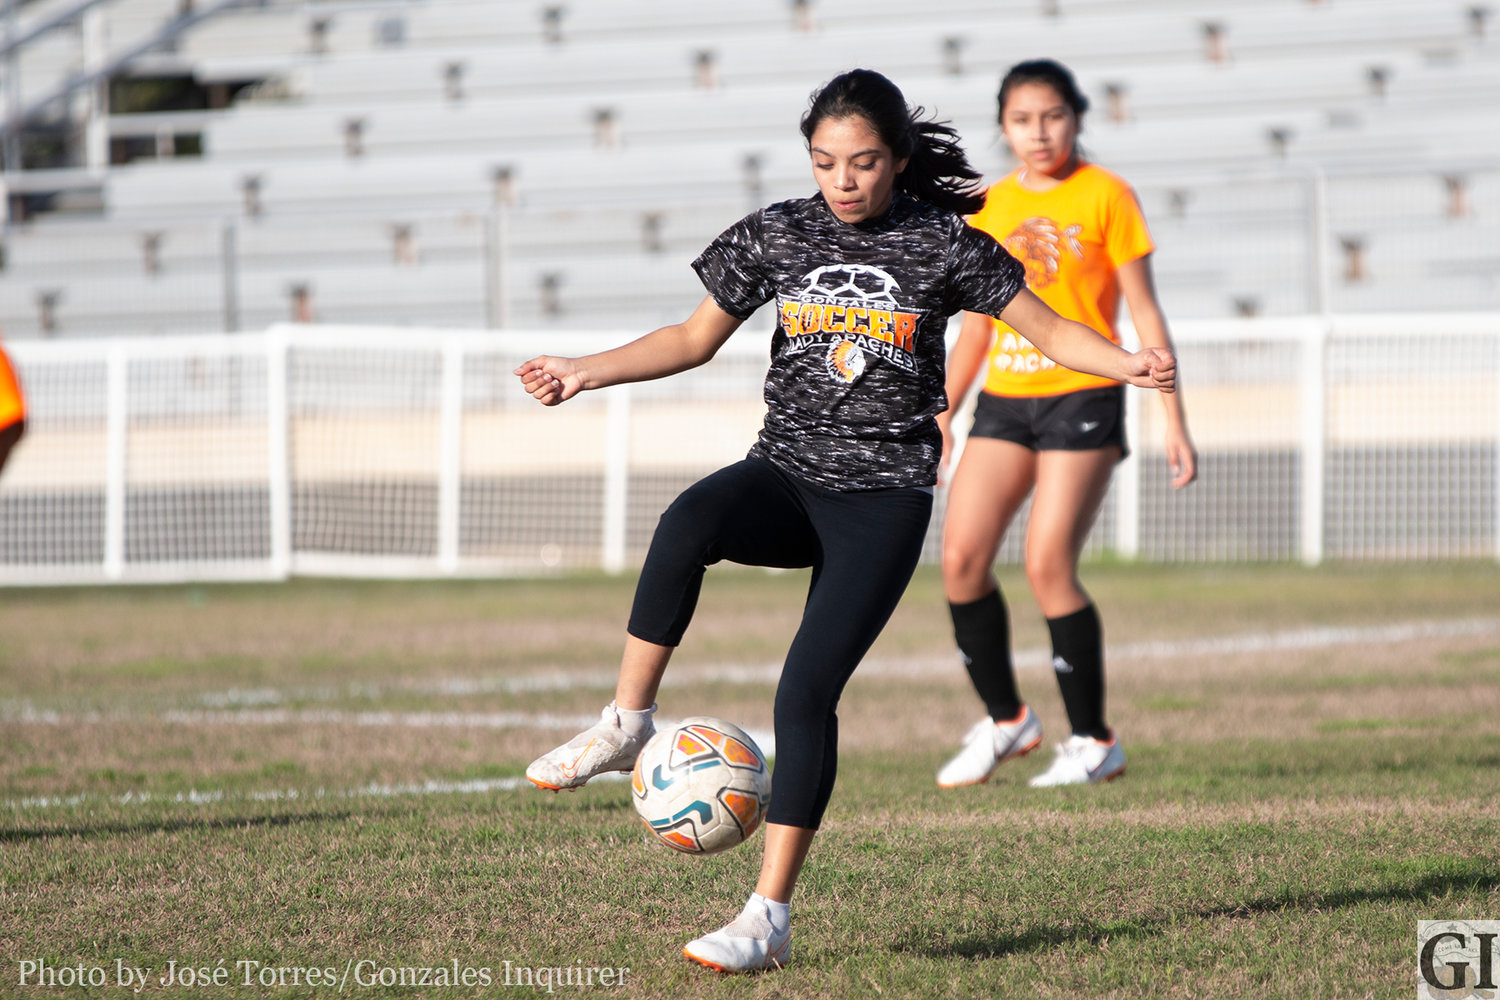 The Gonzales Lady Apaches used last Friday to scrimmage against each other at Apache Field. This Friday they open District 29-4A with a home game against La Vernia.